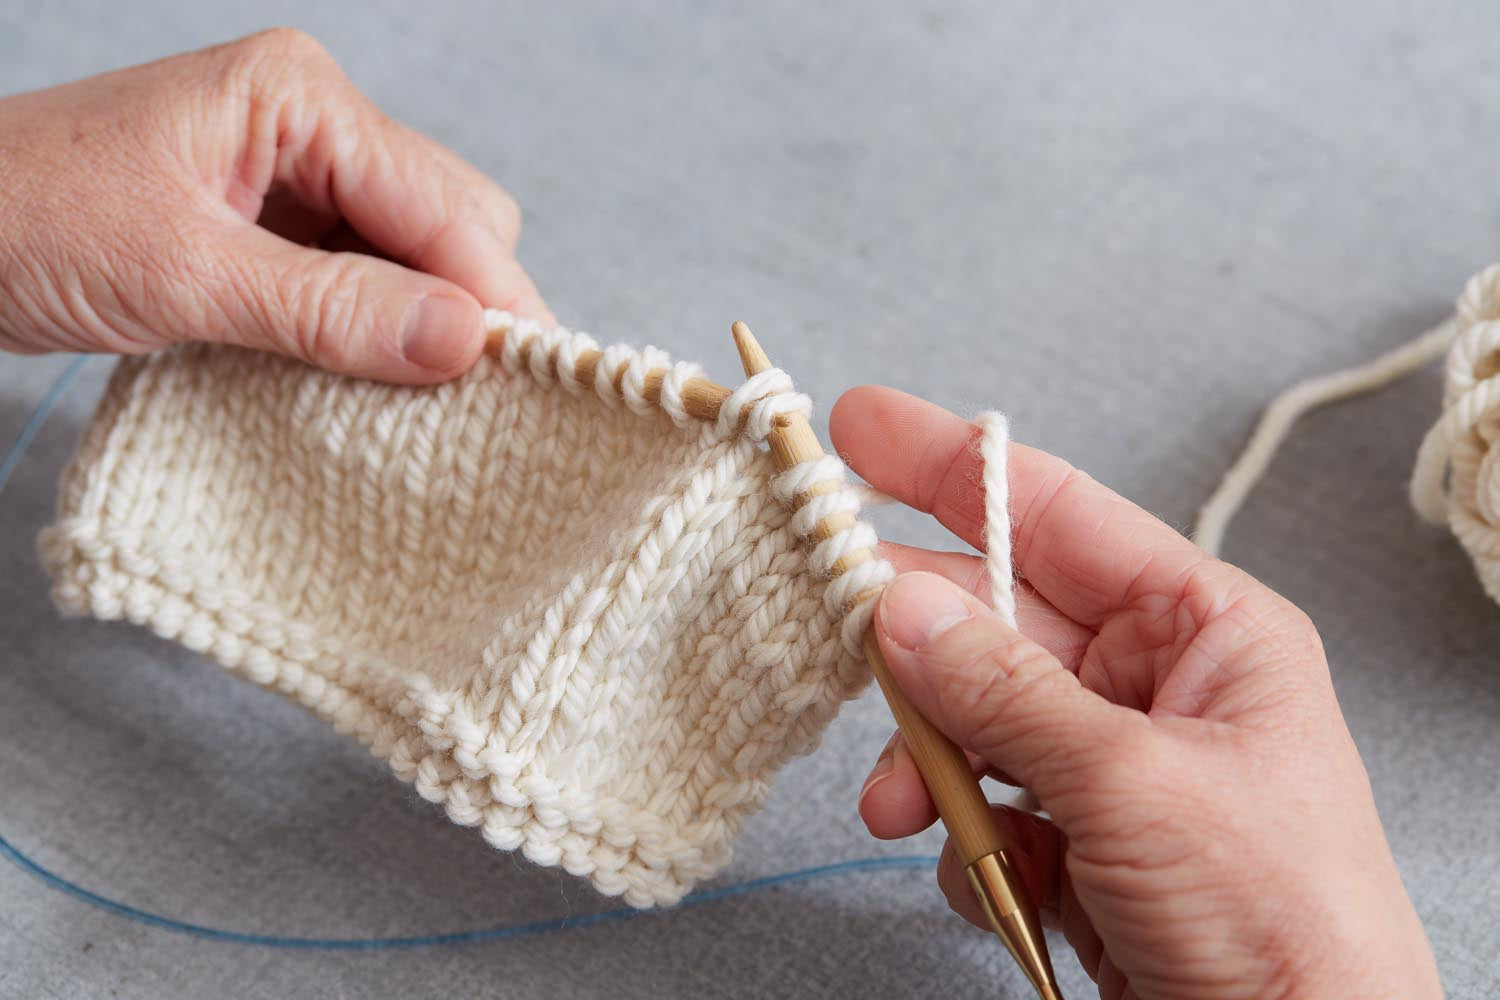 How To Slip Slip Knit Ssk More Neatly Cocoknits